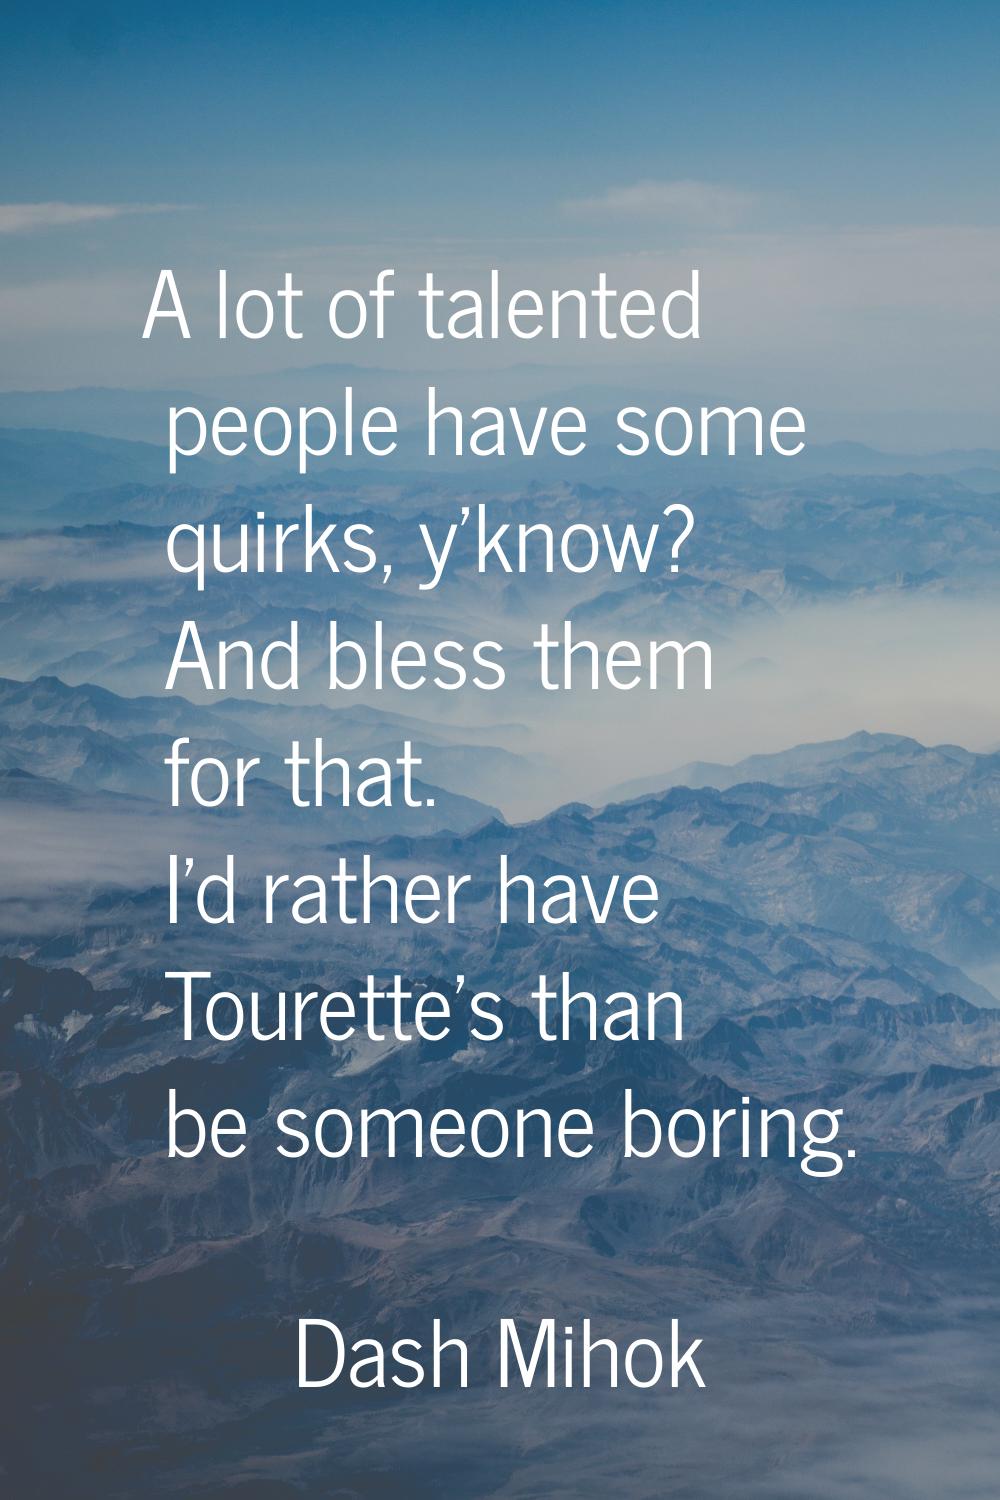 A lot of talented people have some quirks, y'know? And bless them for that. I'd rather have Tourett